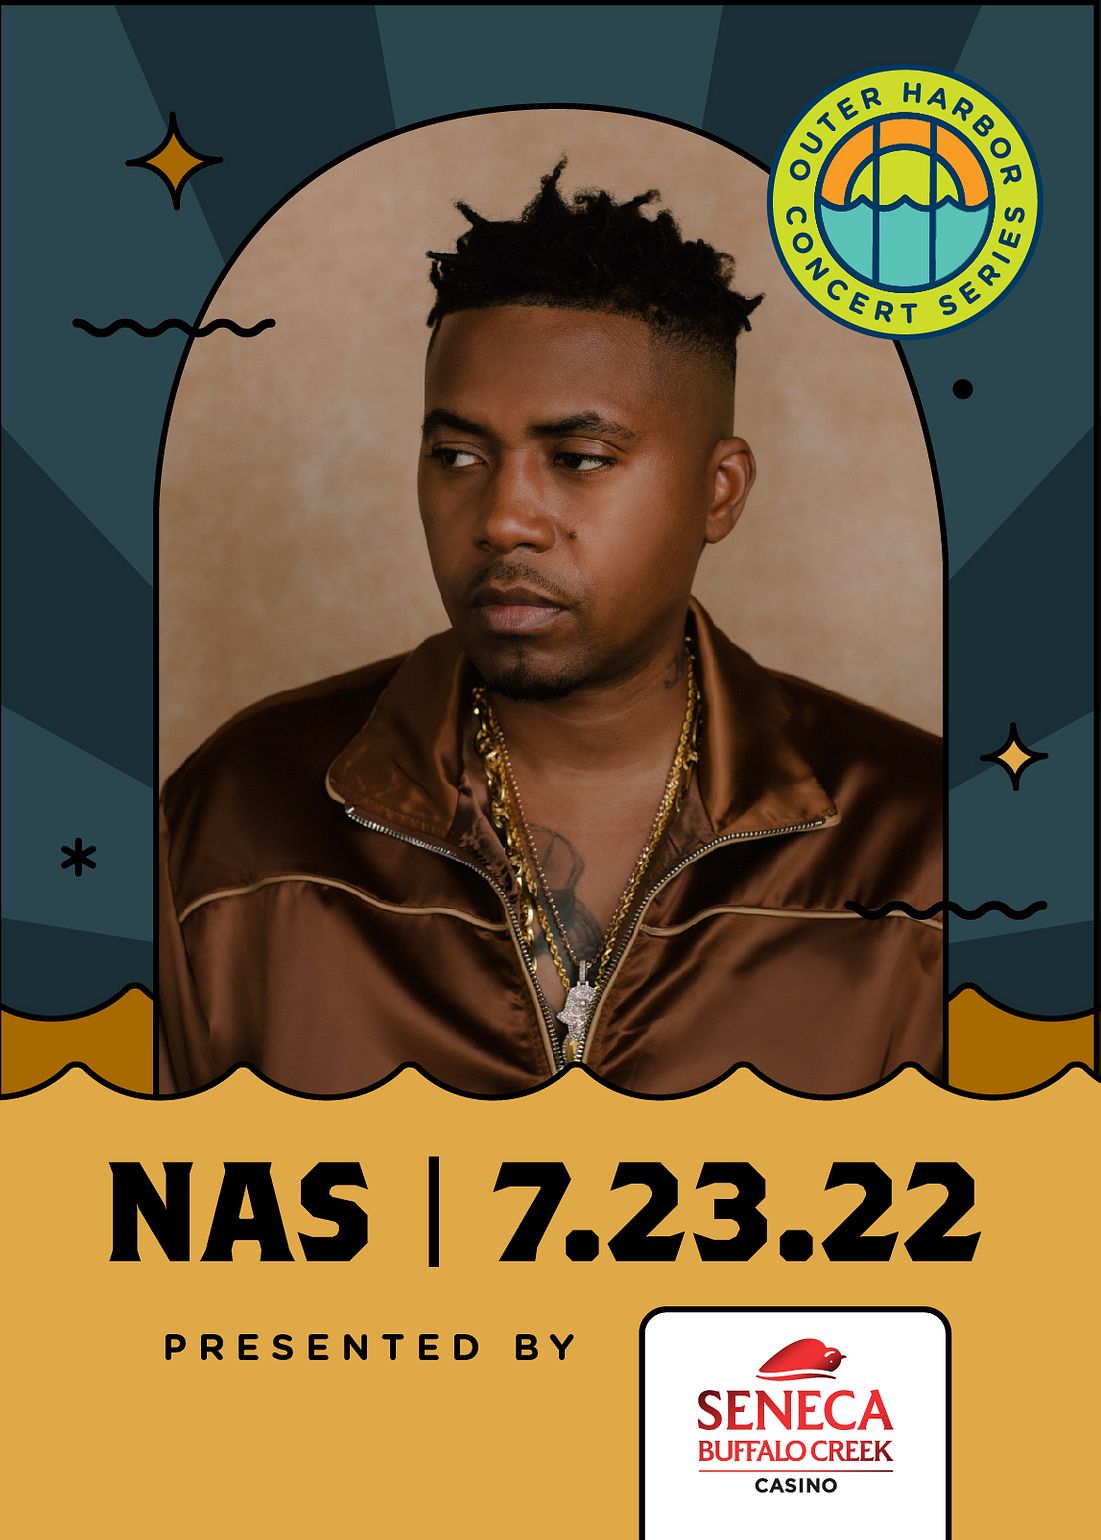 Nas to play Outer Harbor Concert Series All WNY